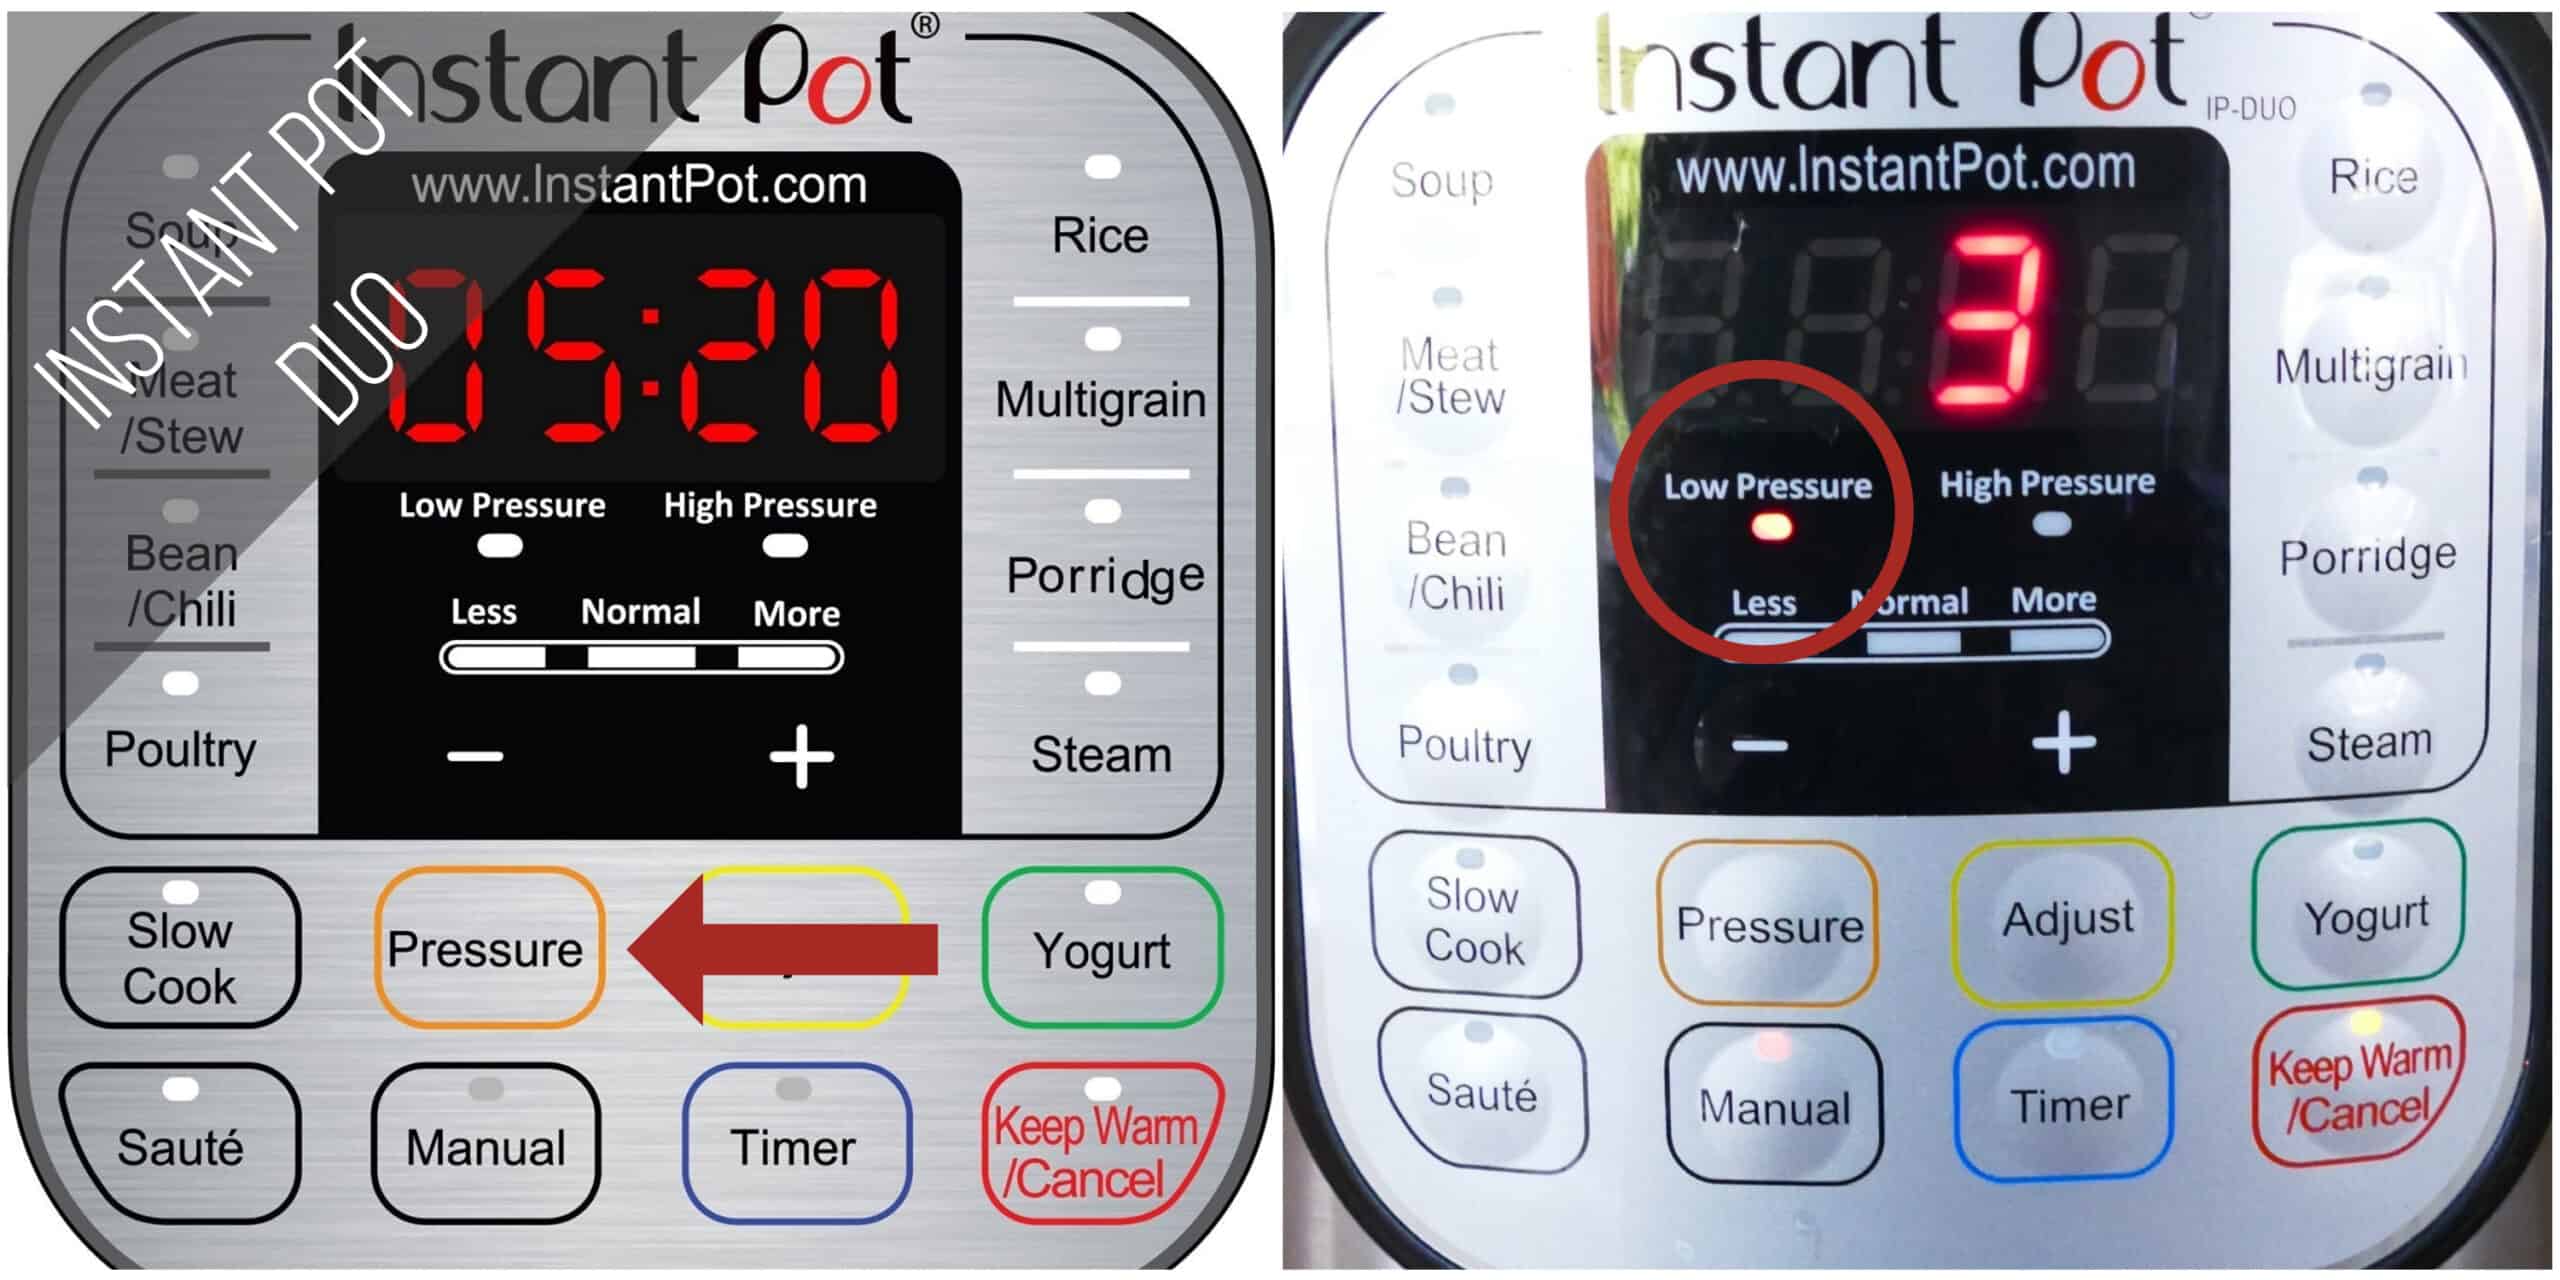 Instant Pot Duo low pressure cook 3 minutes collage - pressure button, low pressure light on and 3 minutes in the display